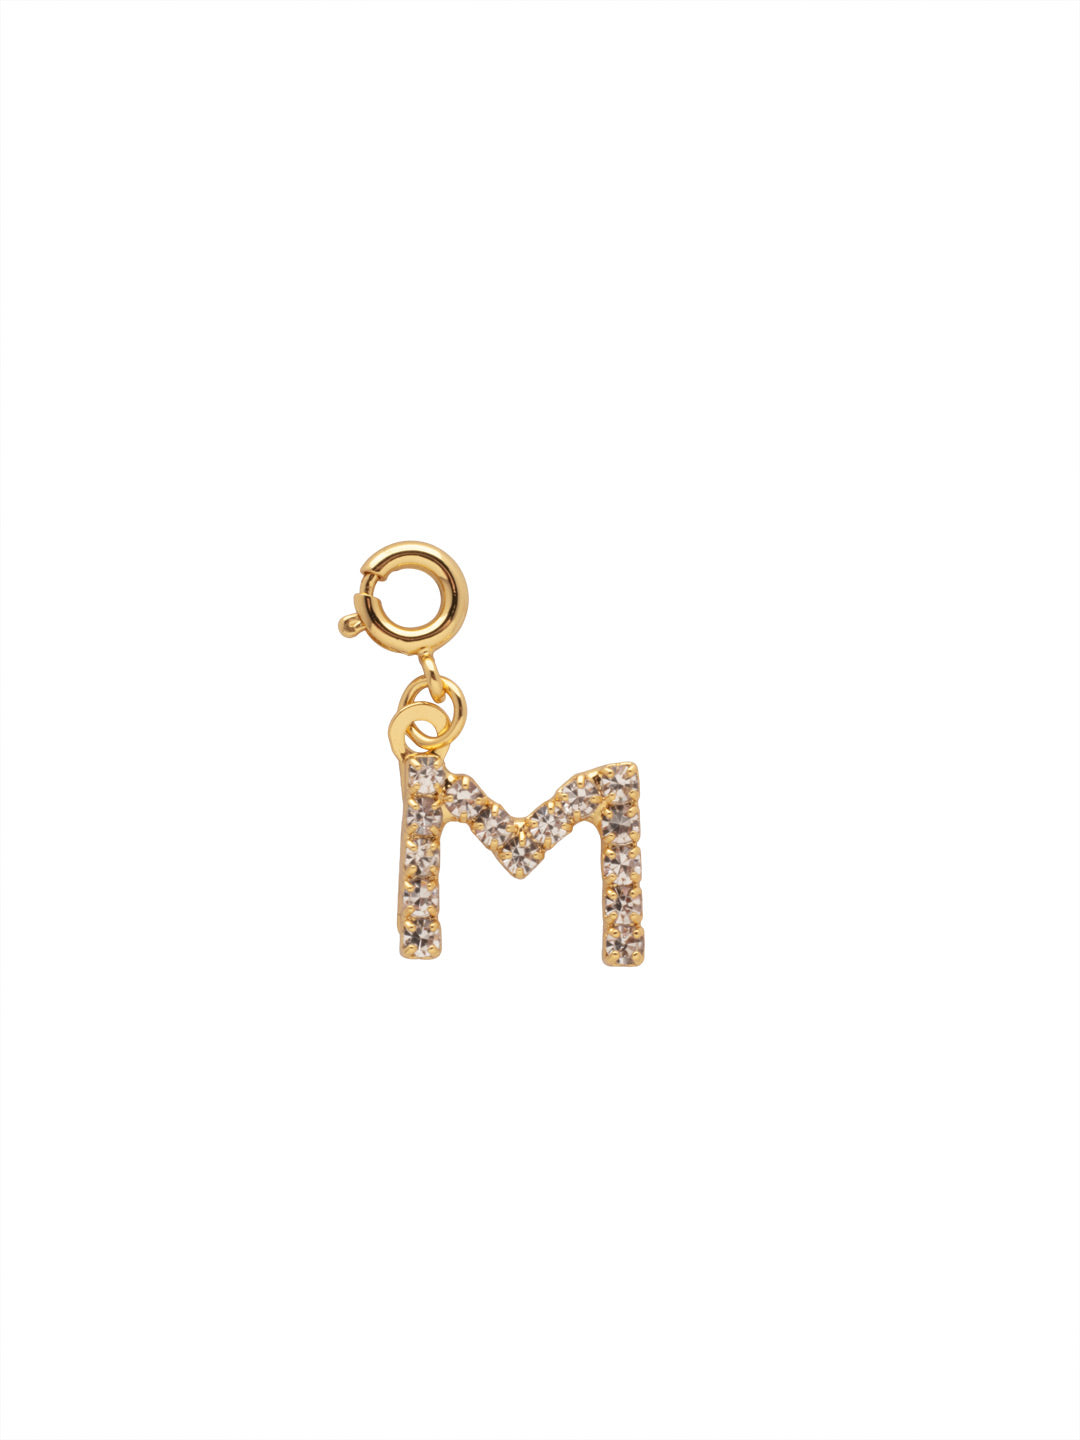 "M" Initial Charm - CFB13BGCRY - <p>The Initial Charm features a metal letter embellished with small round crystals and a small spring ring clasp. From Sorrelli's Crystal collection in our Bright Gold-tone finish.</p>